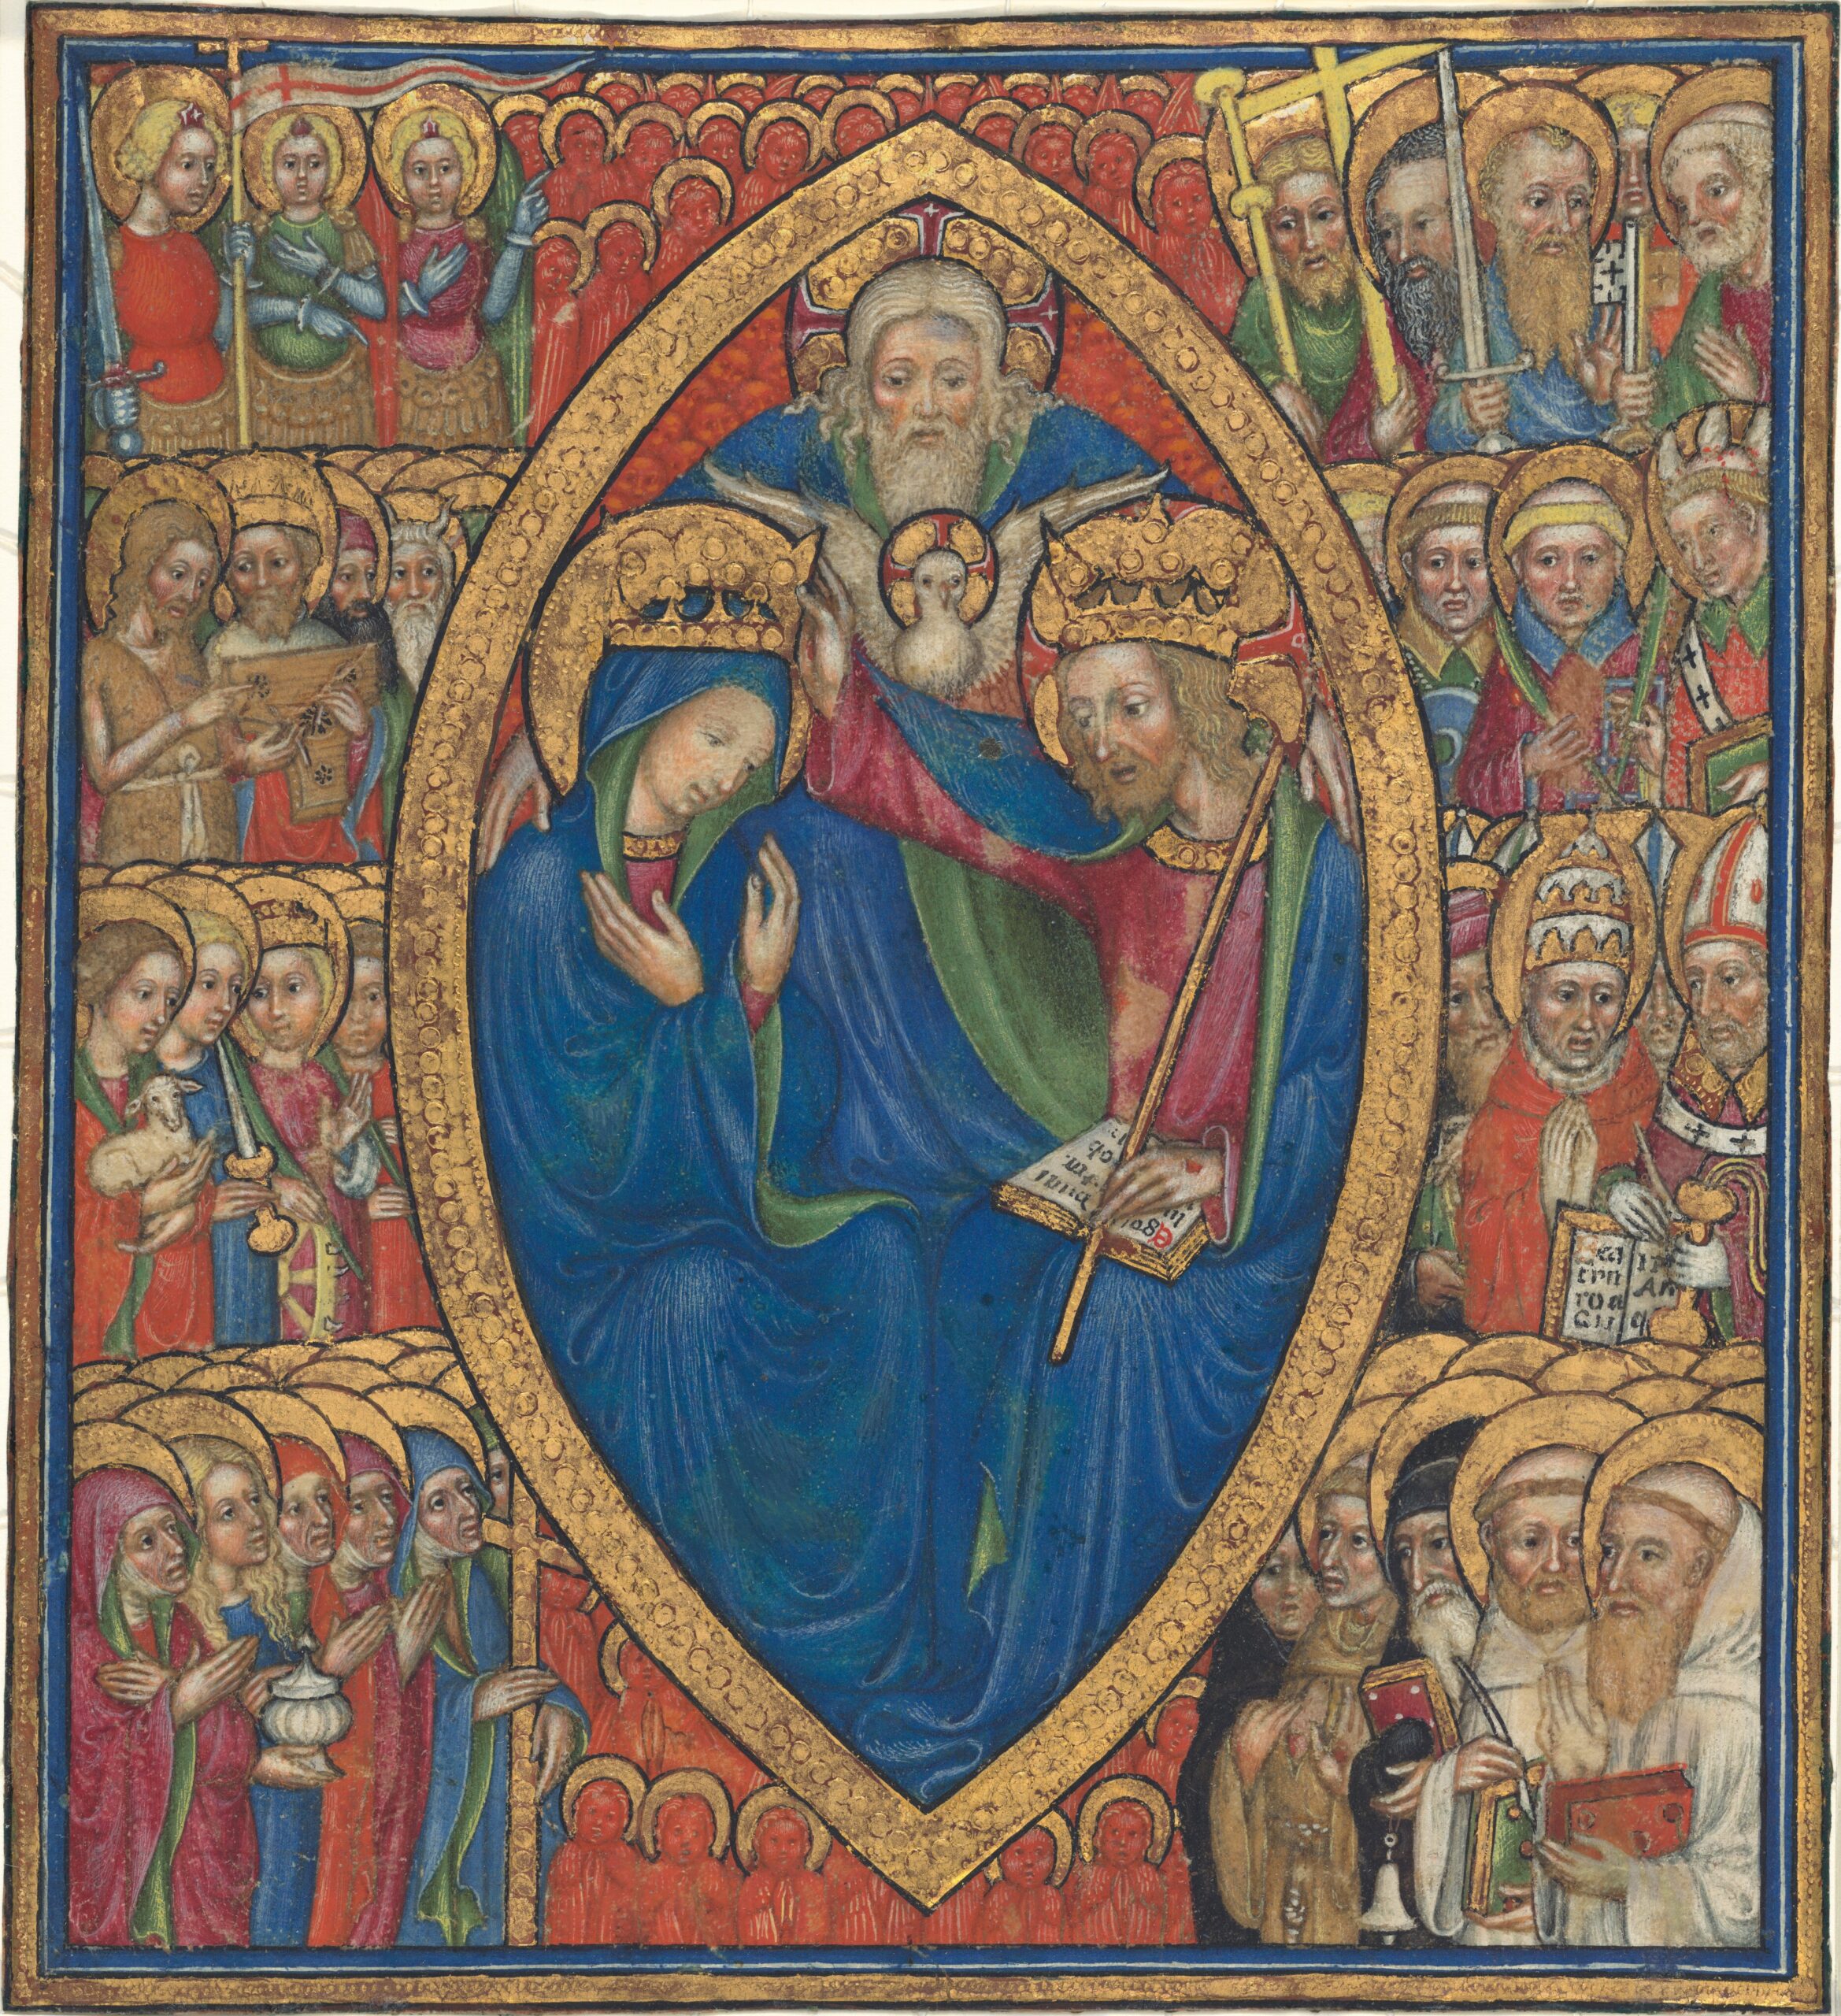 From Coronation of the Virgin with the Trinity and the Saints by Olivetan Master. 